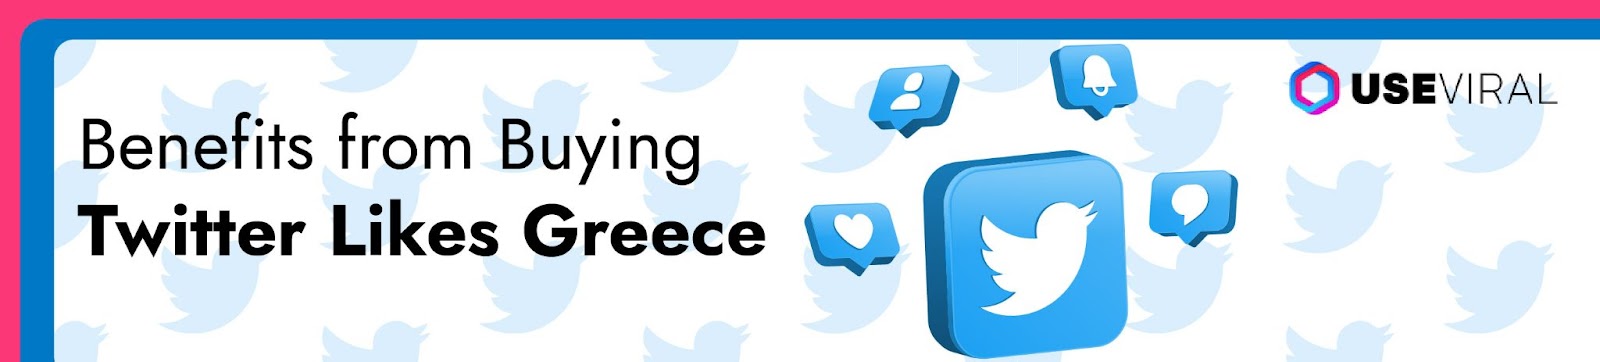 Benefits from Buying Twitter Likes Greece